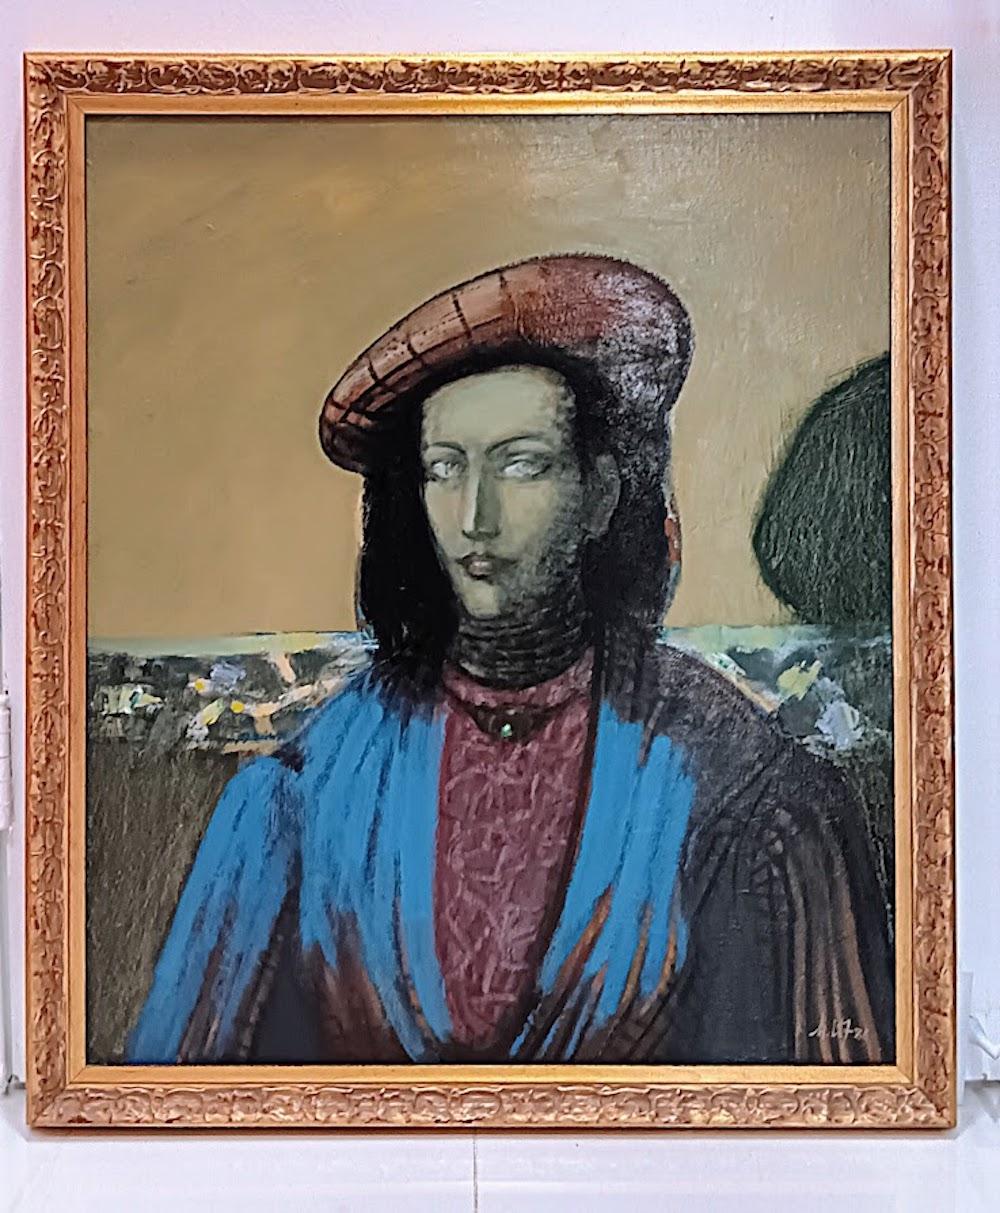 Karo Mkrchtarian Figurative Painting - Karo Mkrtchyan "Countess" Original Oil on Canvas, 1986